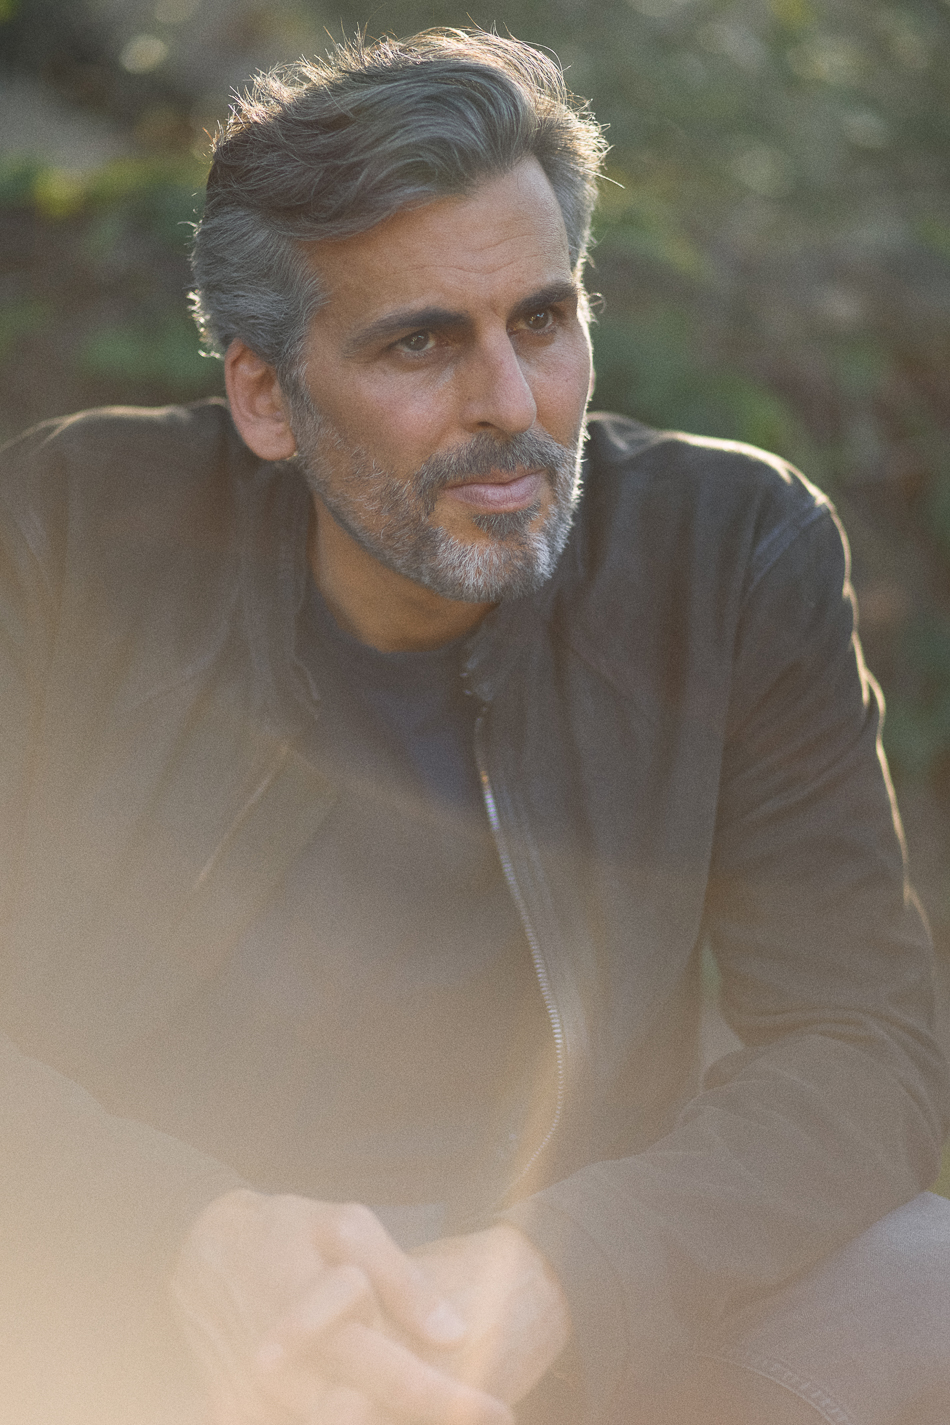 Oded Fehr at his home in Ojai, CA